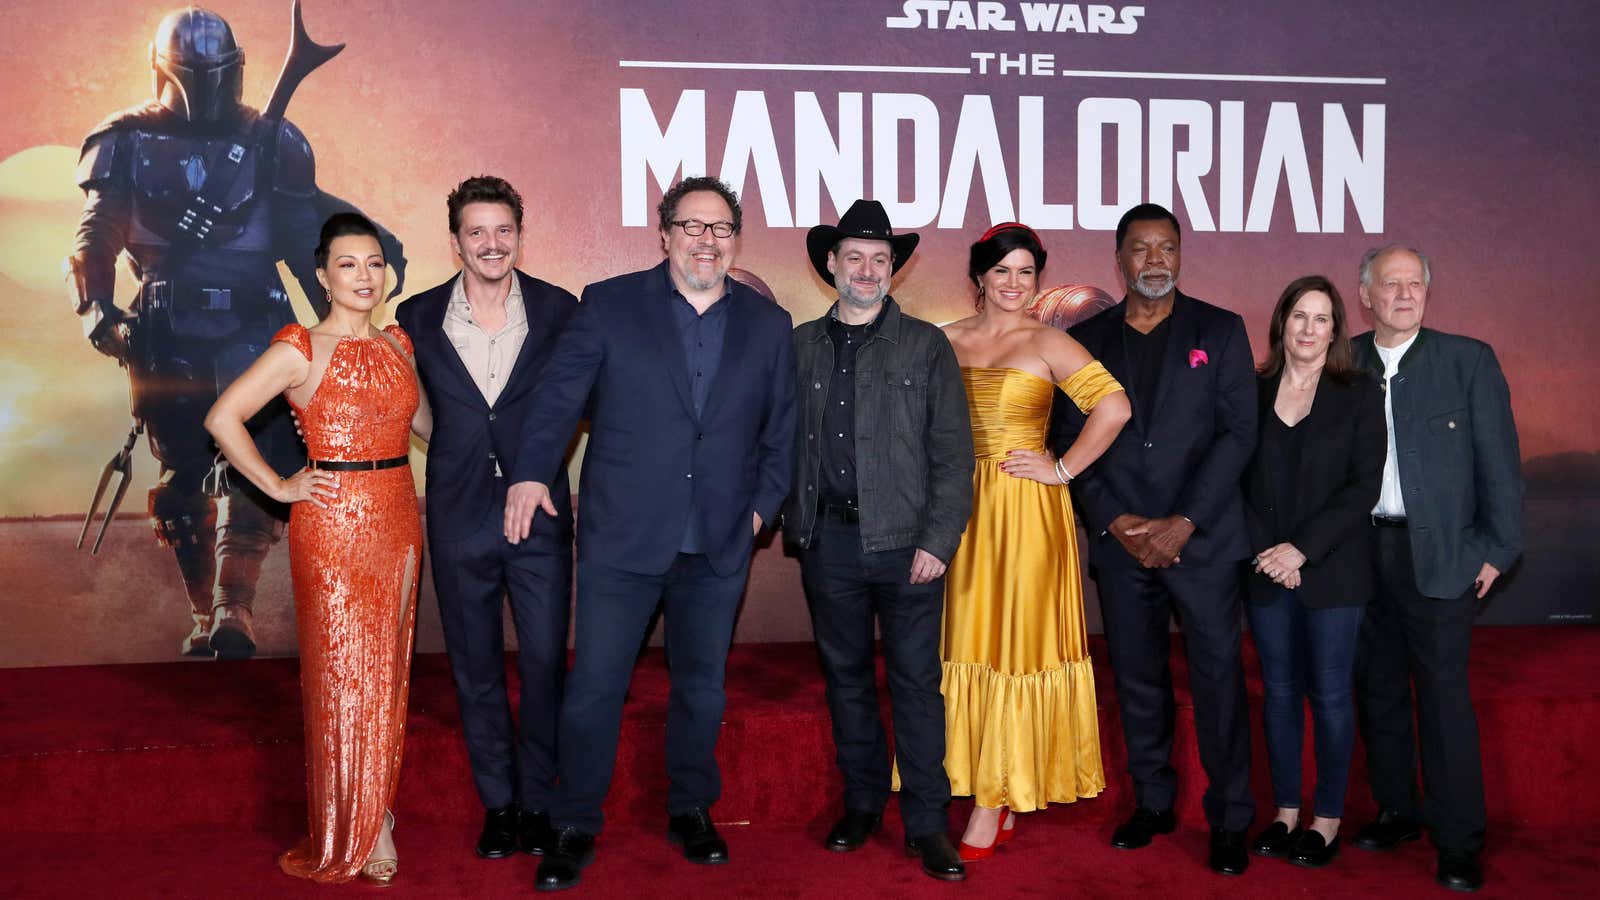 The company is signaling that streaming shows like “The Mandalorian”—not blockbuster movies—are its real future.